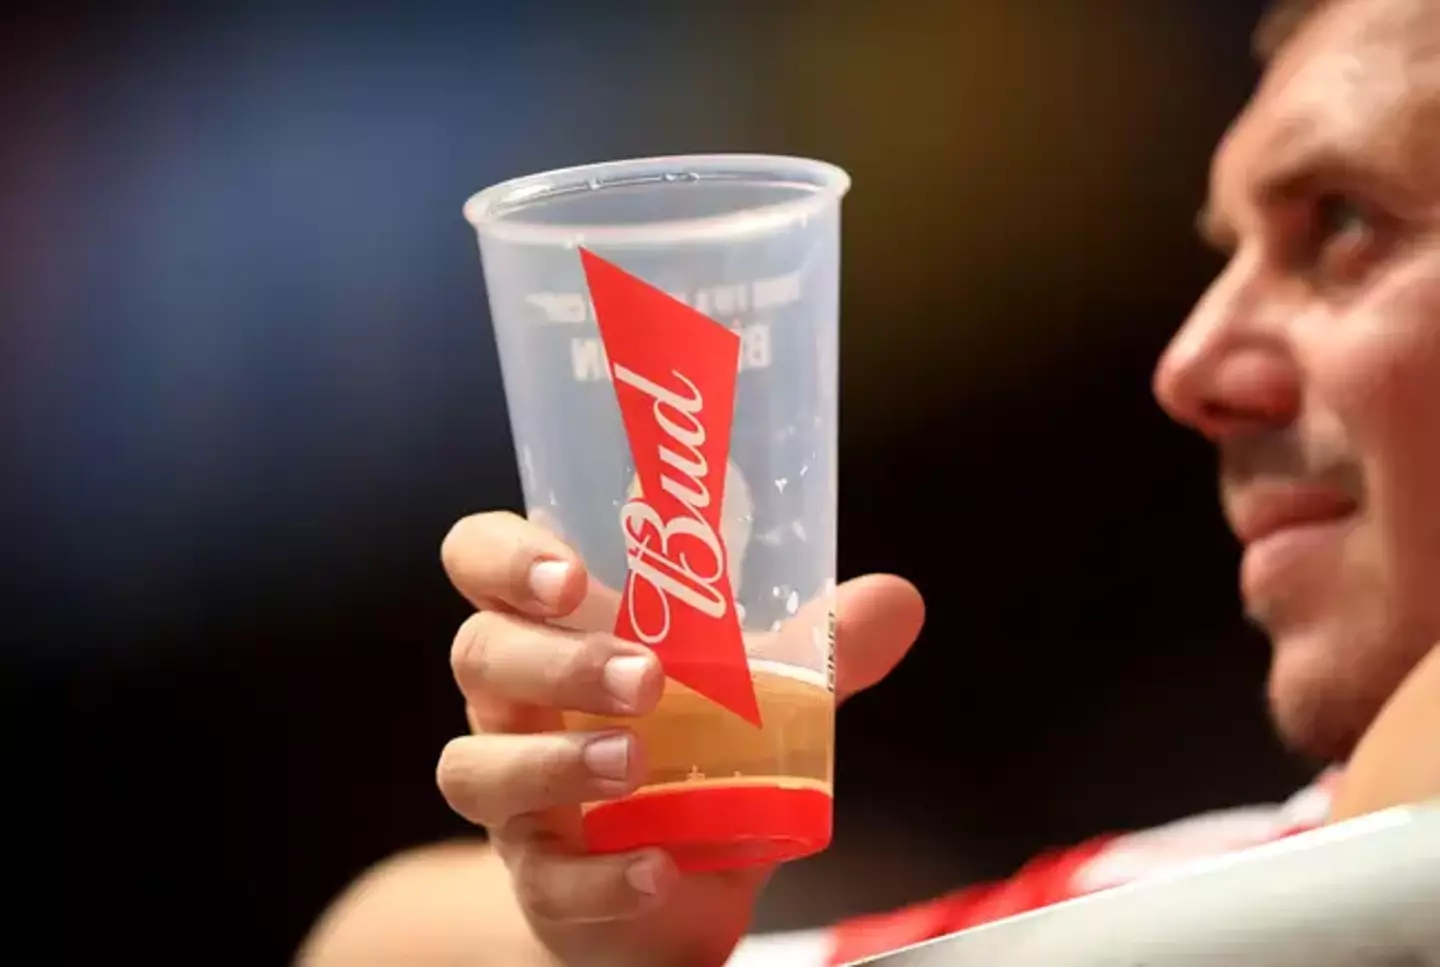 Budweiser had a £63 million exclusive deal with FIFA to sell beer.